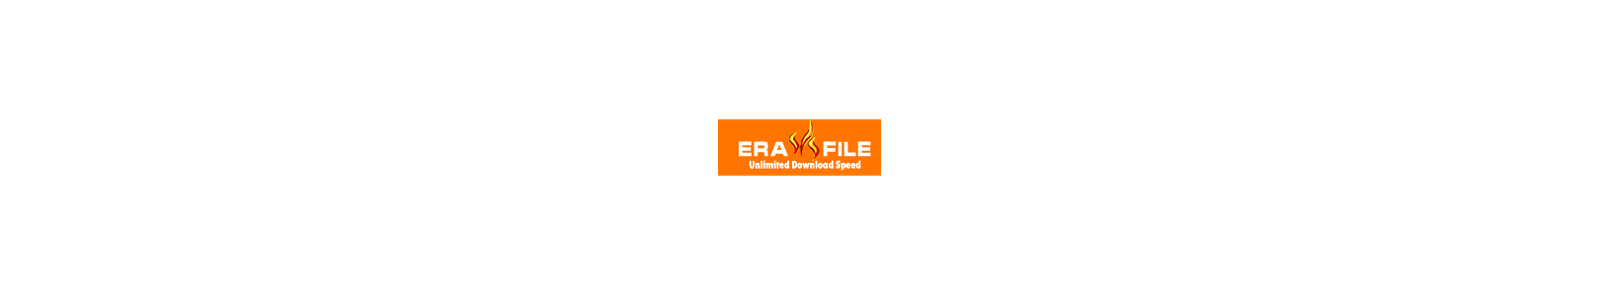 EraFile.com  Reseller In India and worlwide